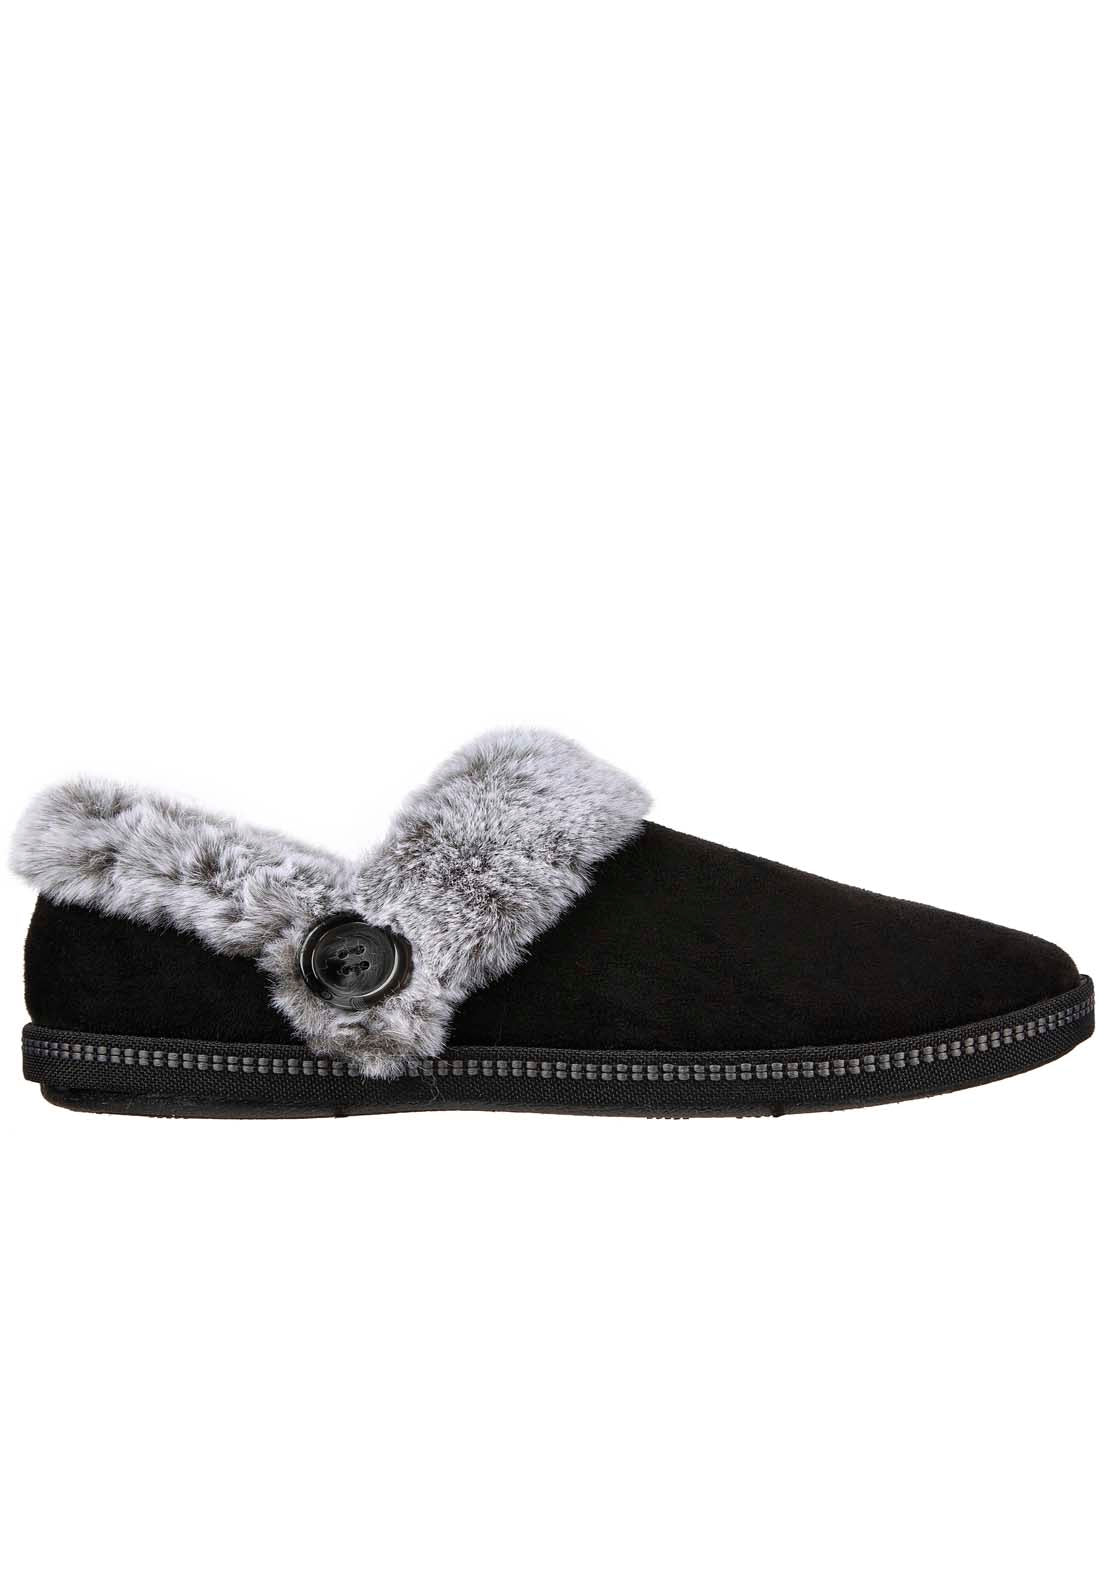 Skechers Cosy Campfire Slipper - Black 4 Shaws Department Stores